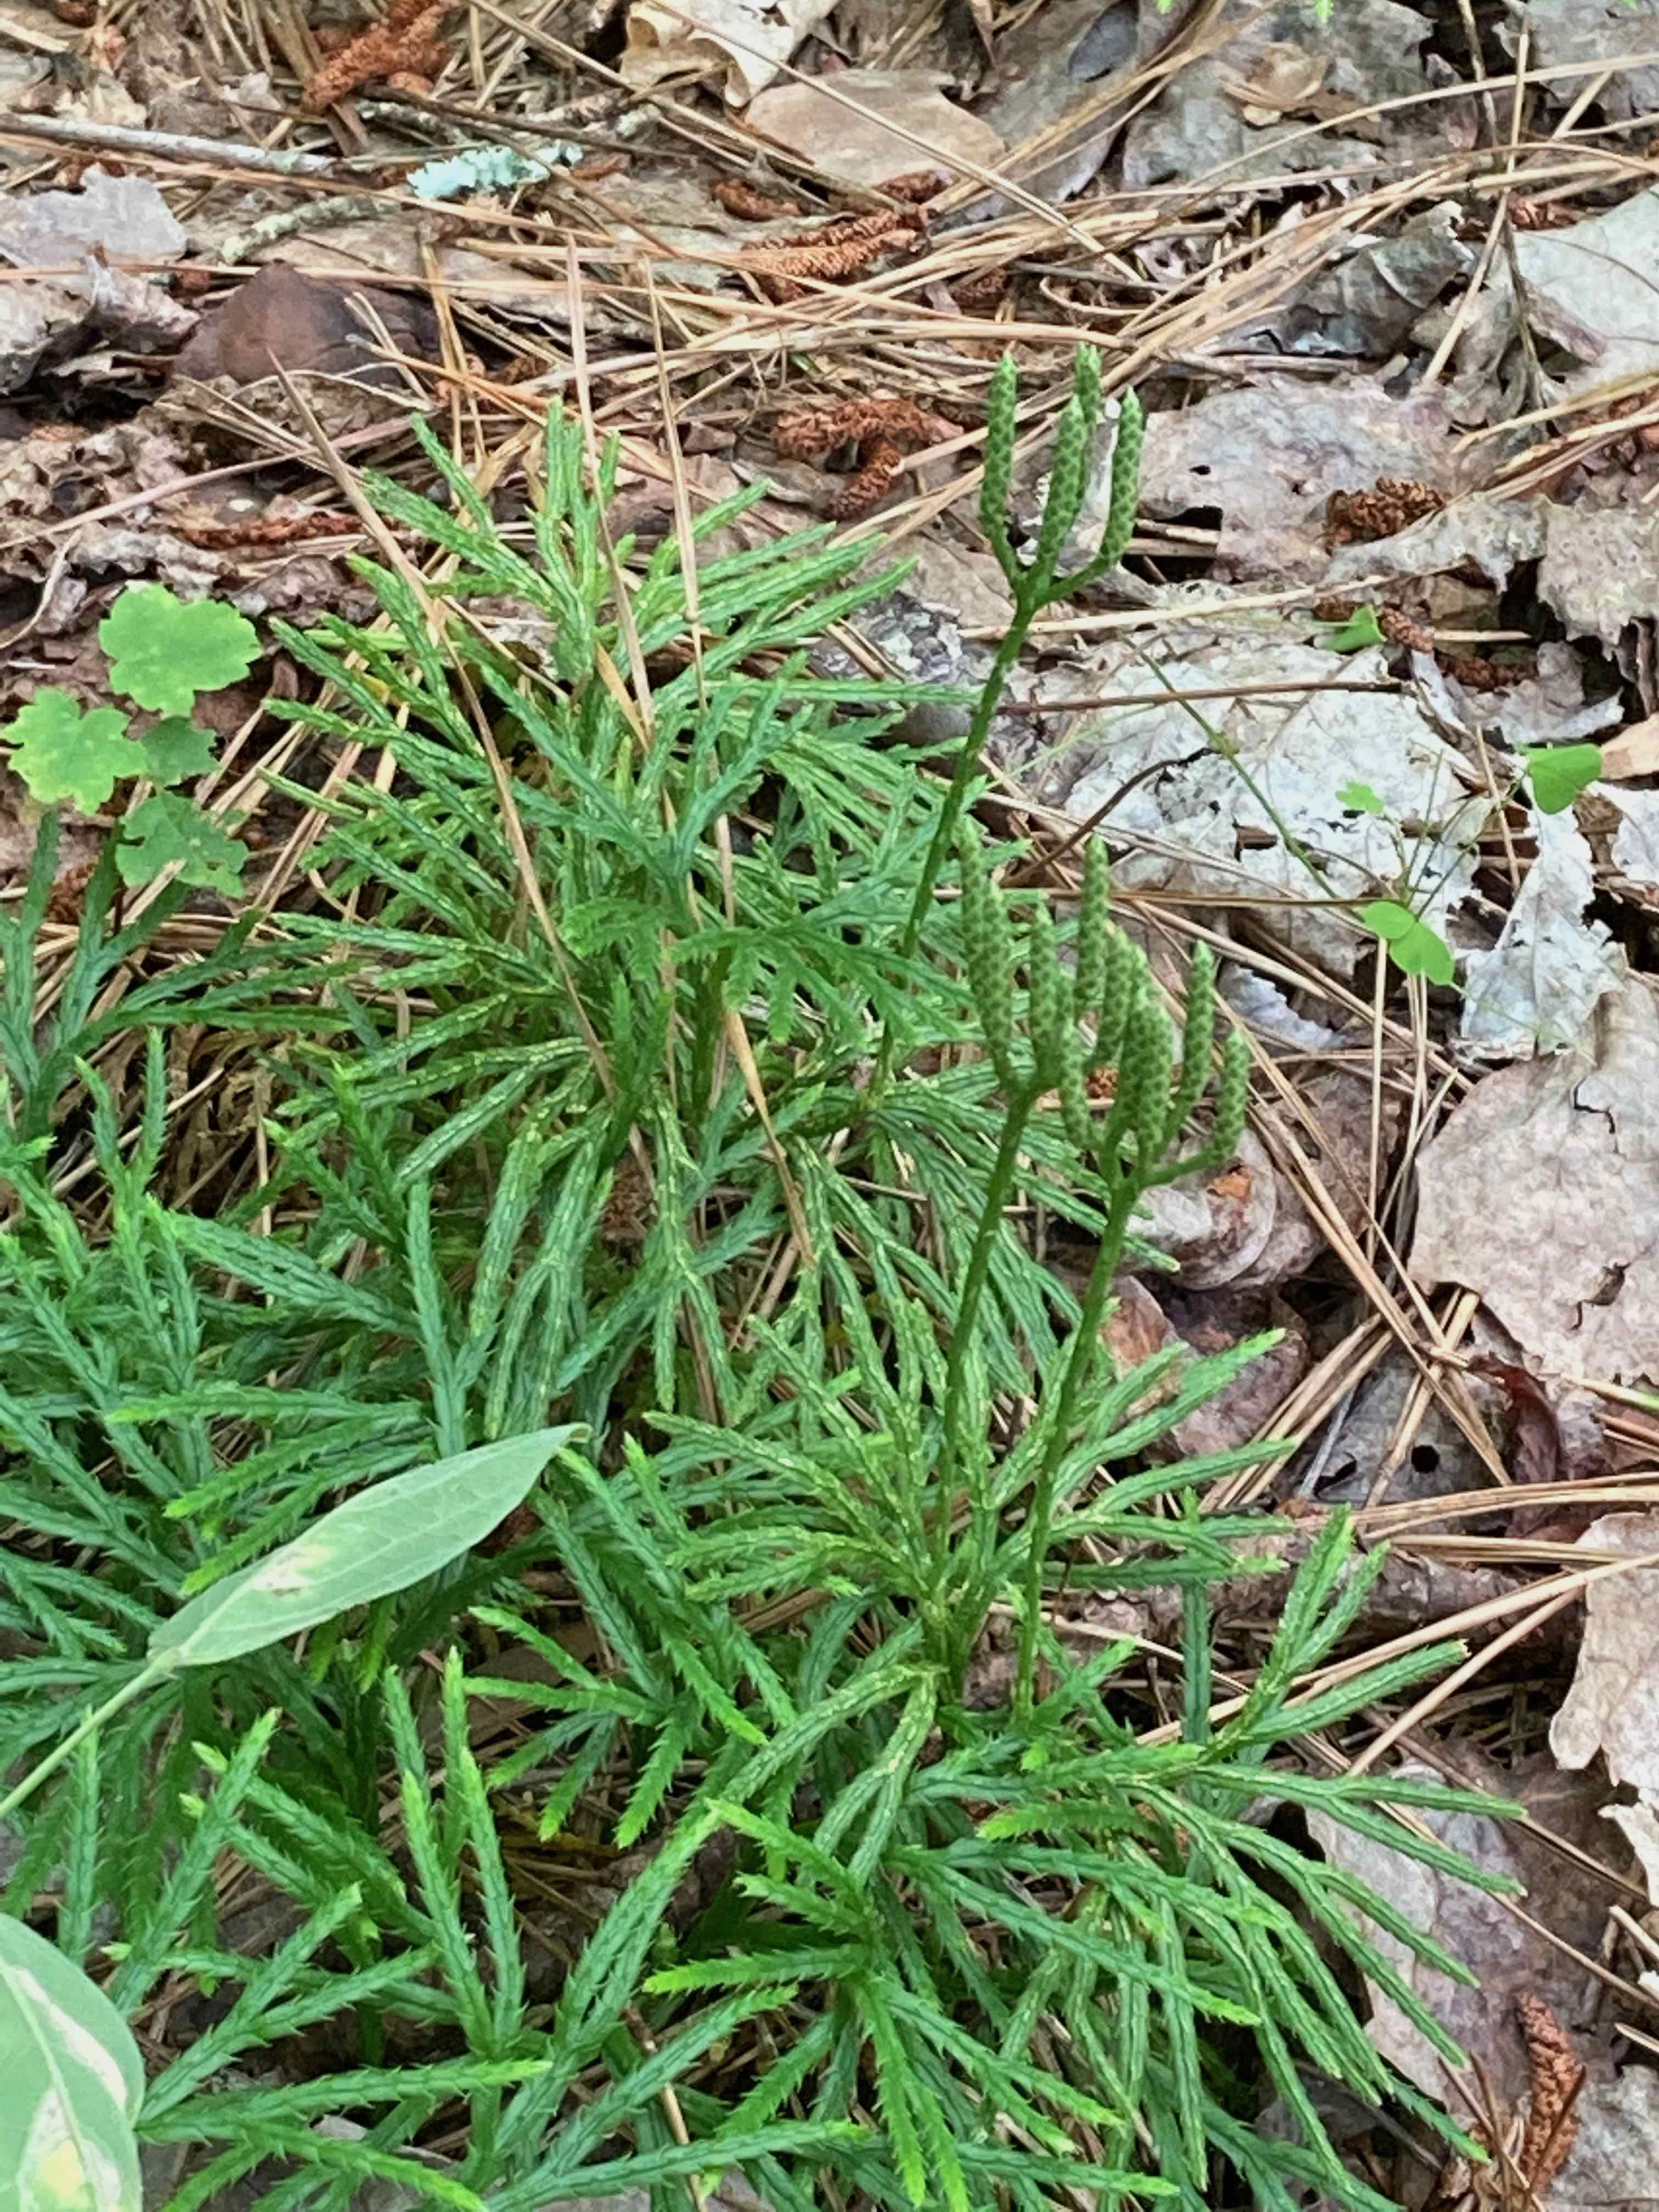 The Scientific Name is Diphasiastrum digitatum [= Lycopodium digitatum]. You will likely hear them called Common Running-cedar, Fan Ground-pine. This picture shows the The plant has horizontal rhizomes which bear vertical stems at intervals - sterile and fertile branchlets. of Diphasiastrum digitatum [= Lycopodium digitatum]